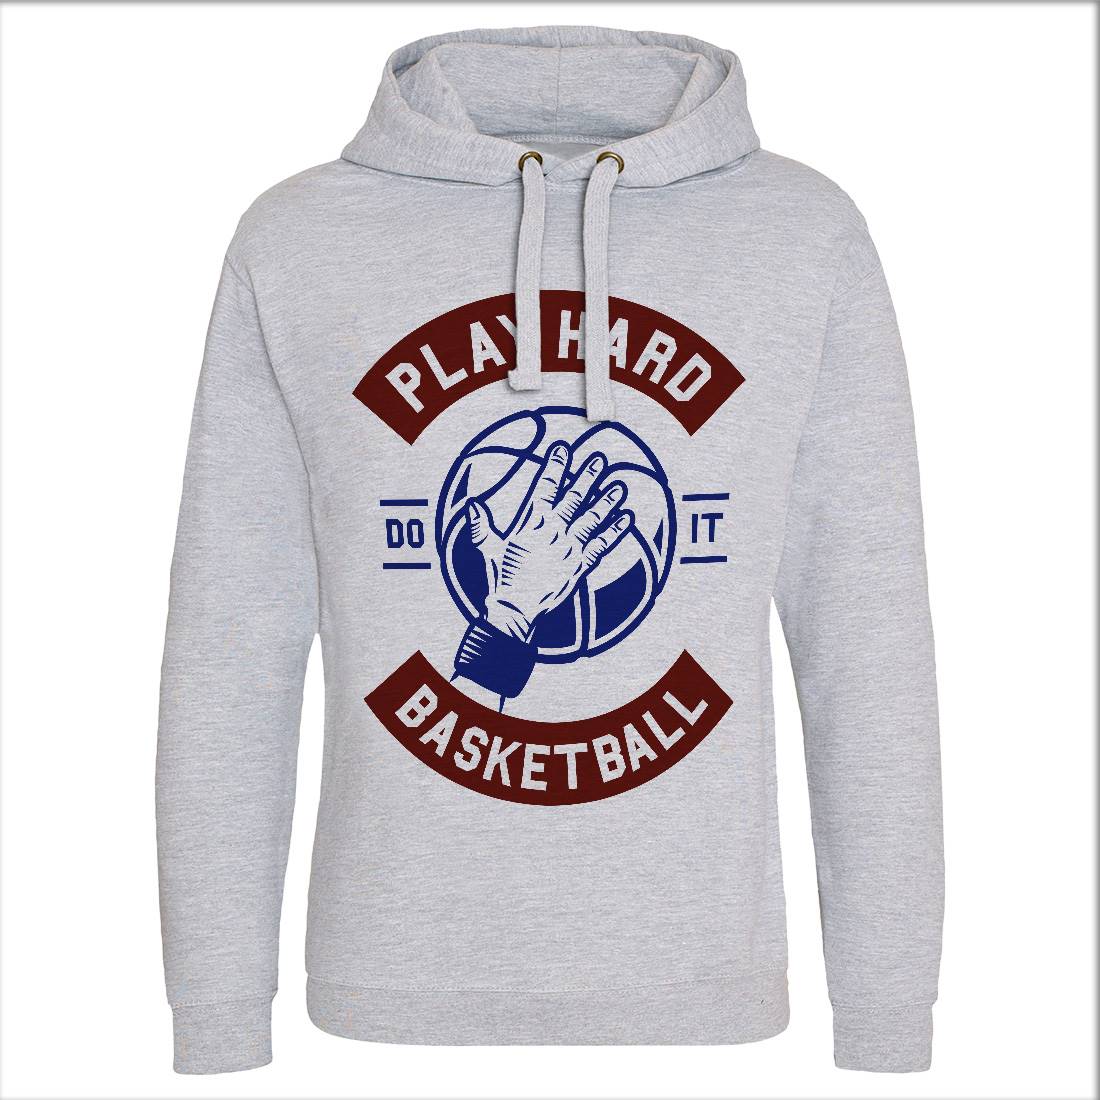 Play Hard Basketball Mens Hoodie Without Pocket Sport A261